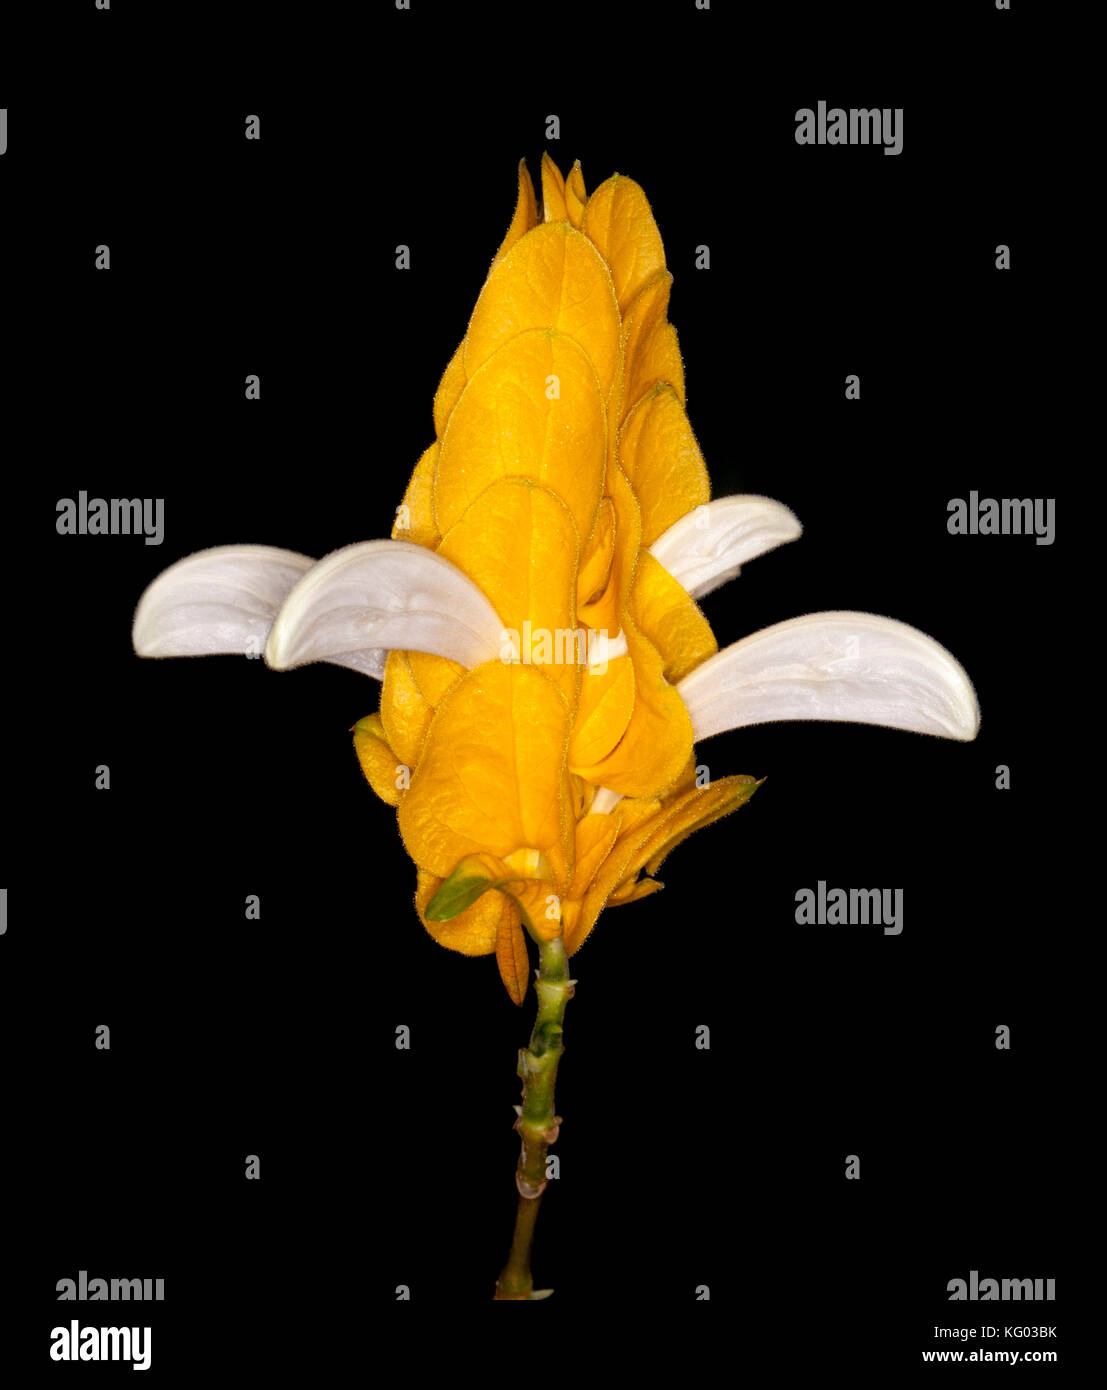 White flowers surrounded by vivid golden yellow bracts of evergreen shrub Pachystachys lutea, Lollipop Plant, on black background Stock Photo